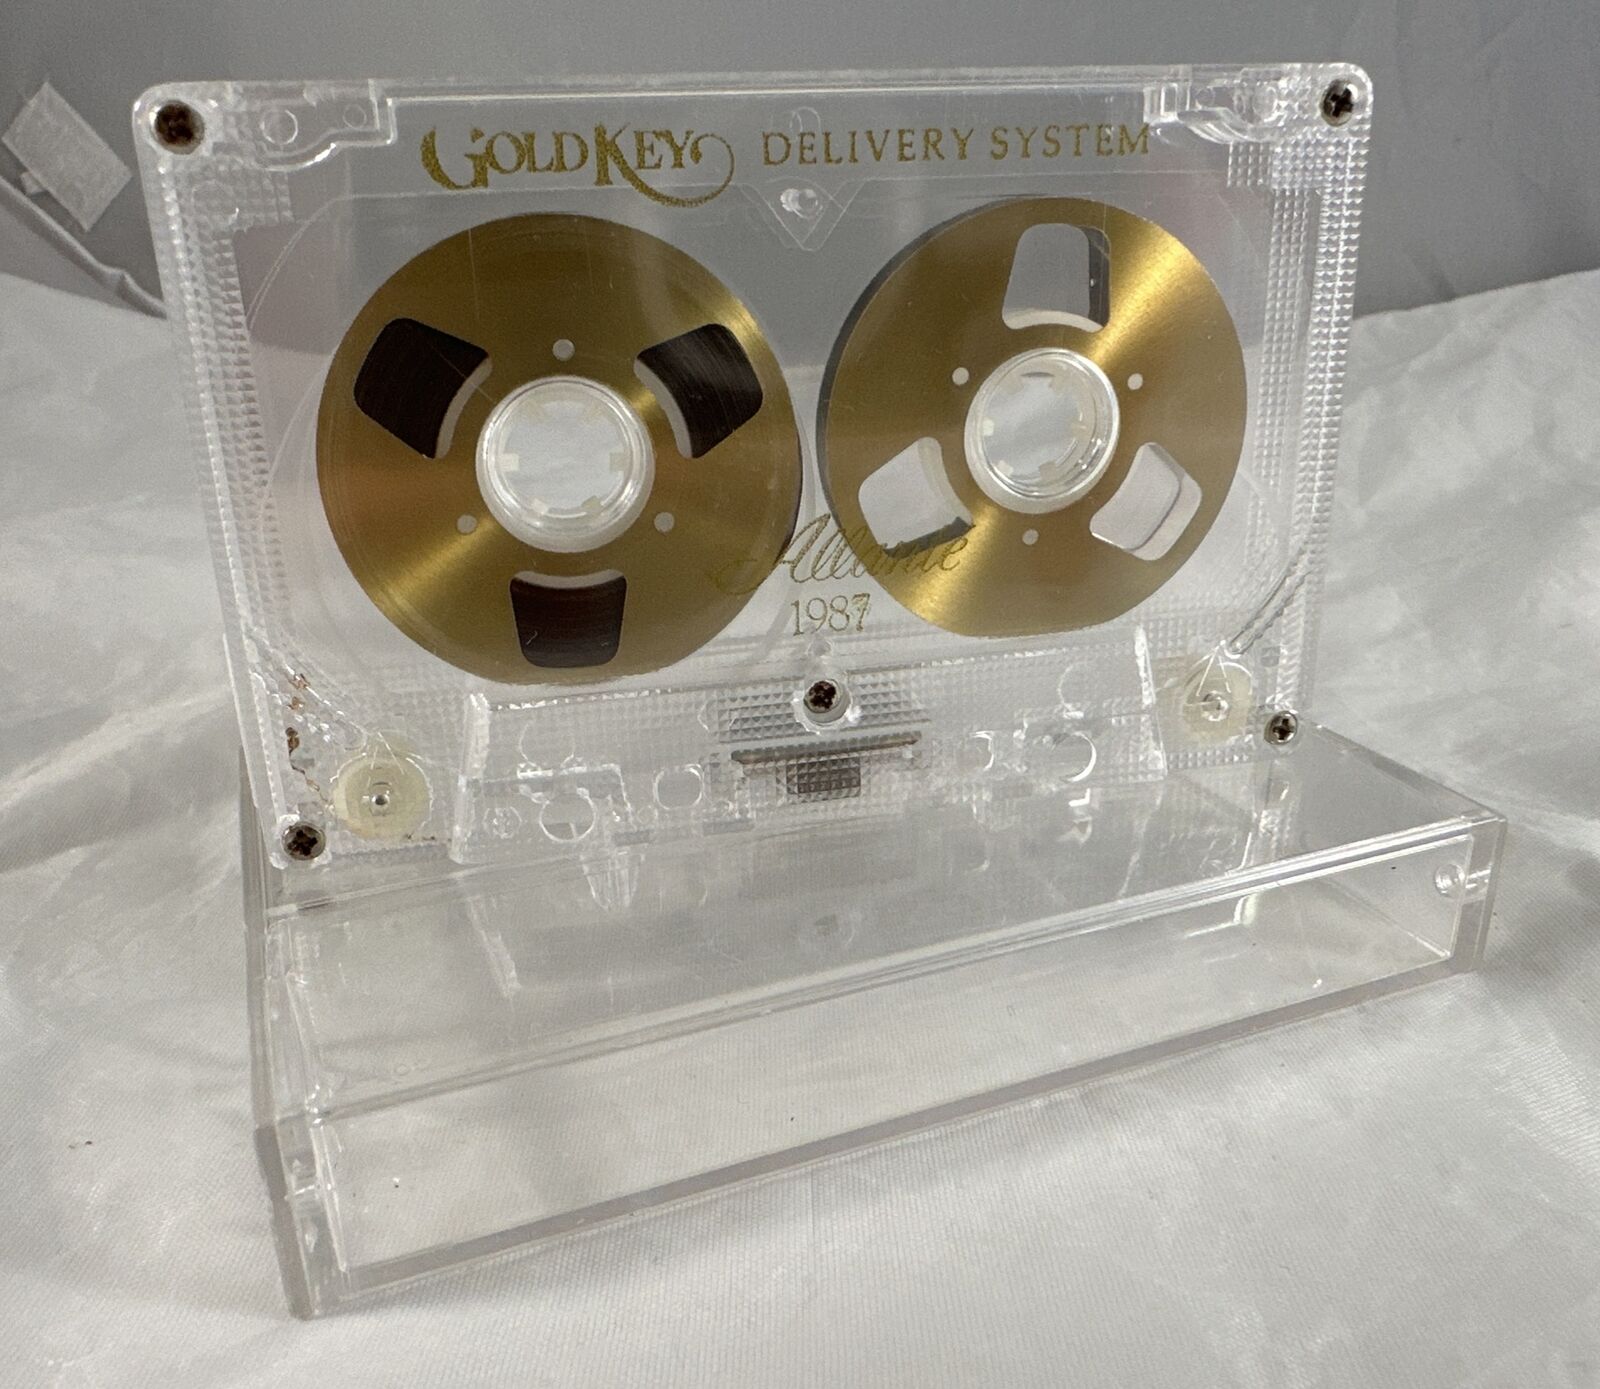 Vintage Cadillac Gold Key Delivery System Allante Cassette Tape (1987).